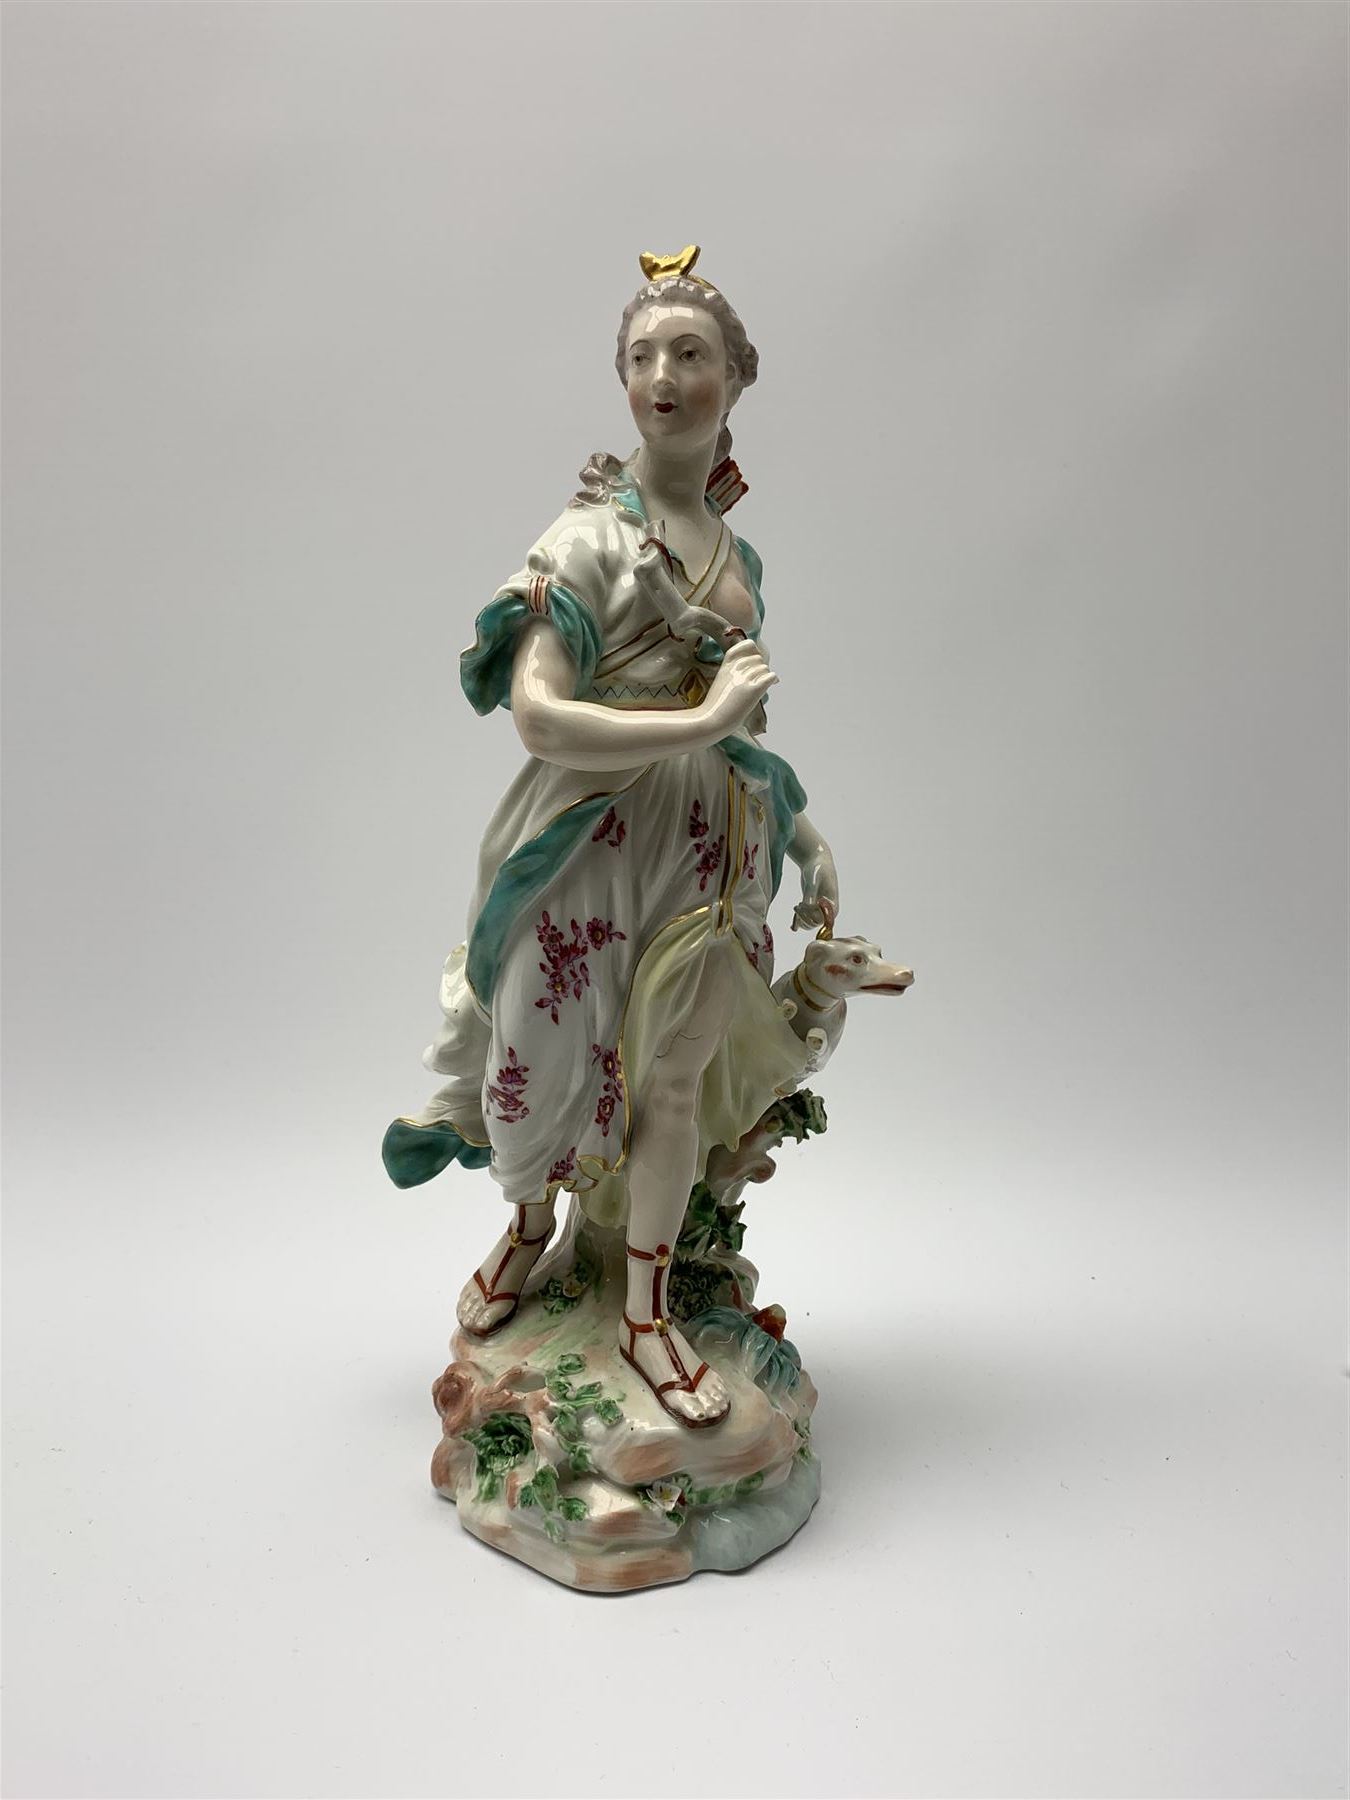 Mid 18th century Derby porcelain figure modelled as Dianna the Huntress - Image 2 of 9